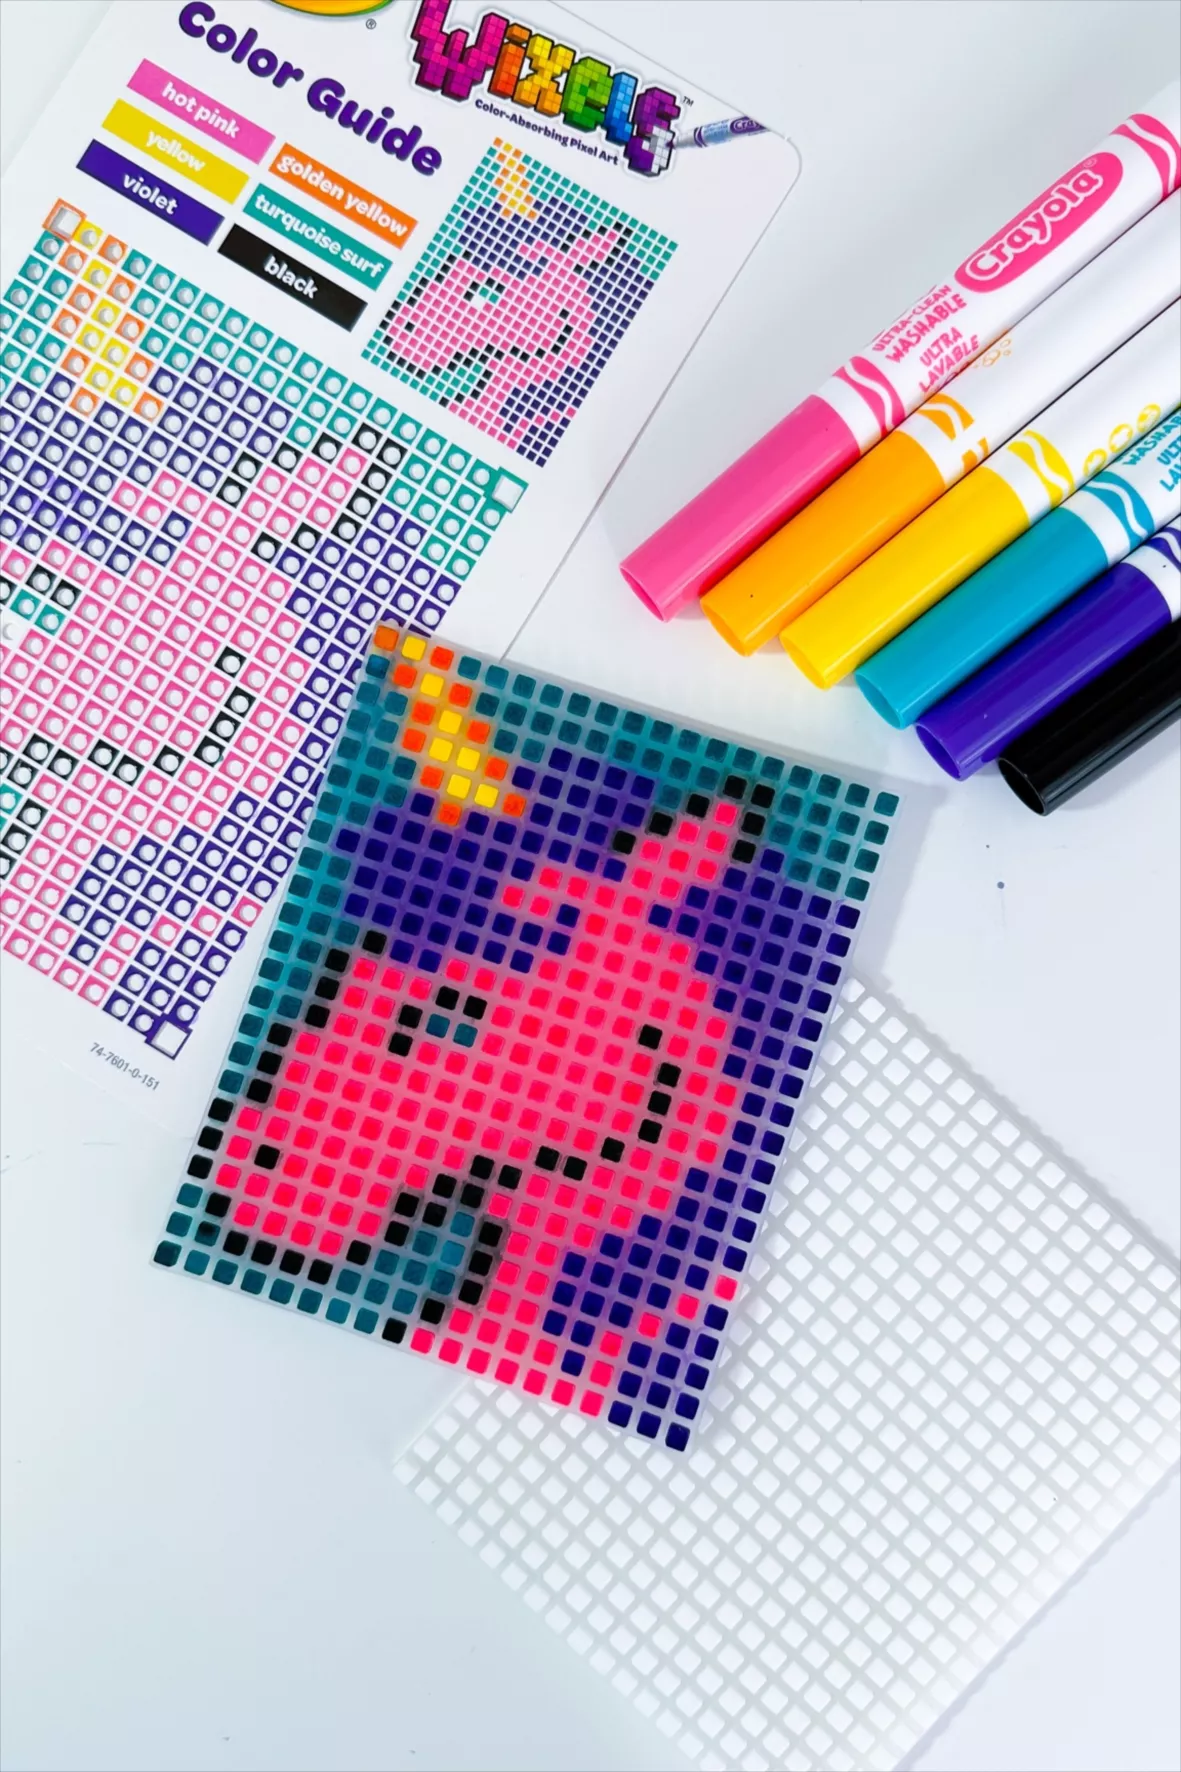 Let's try a Wixels kit from @crayola - follow the pattern, reuse the b